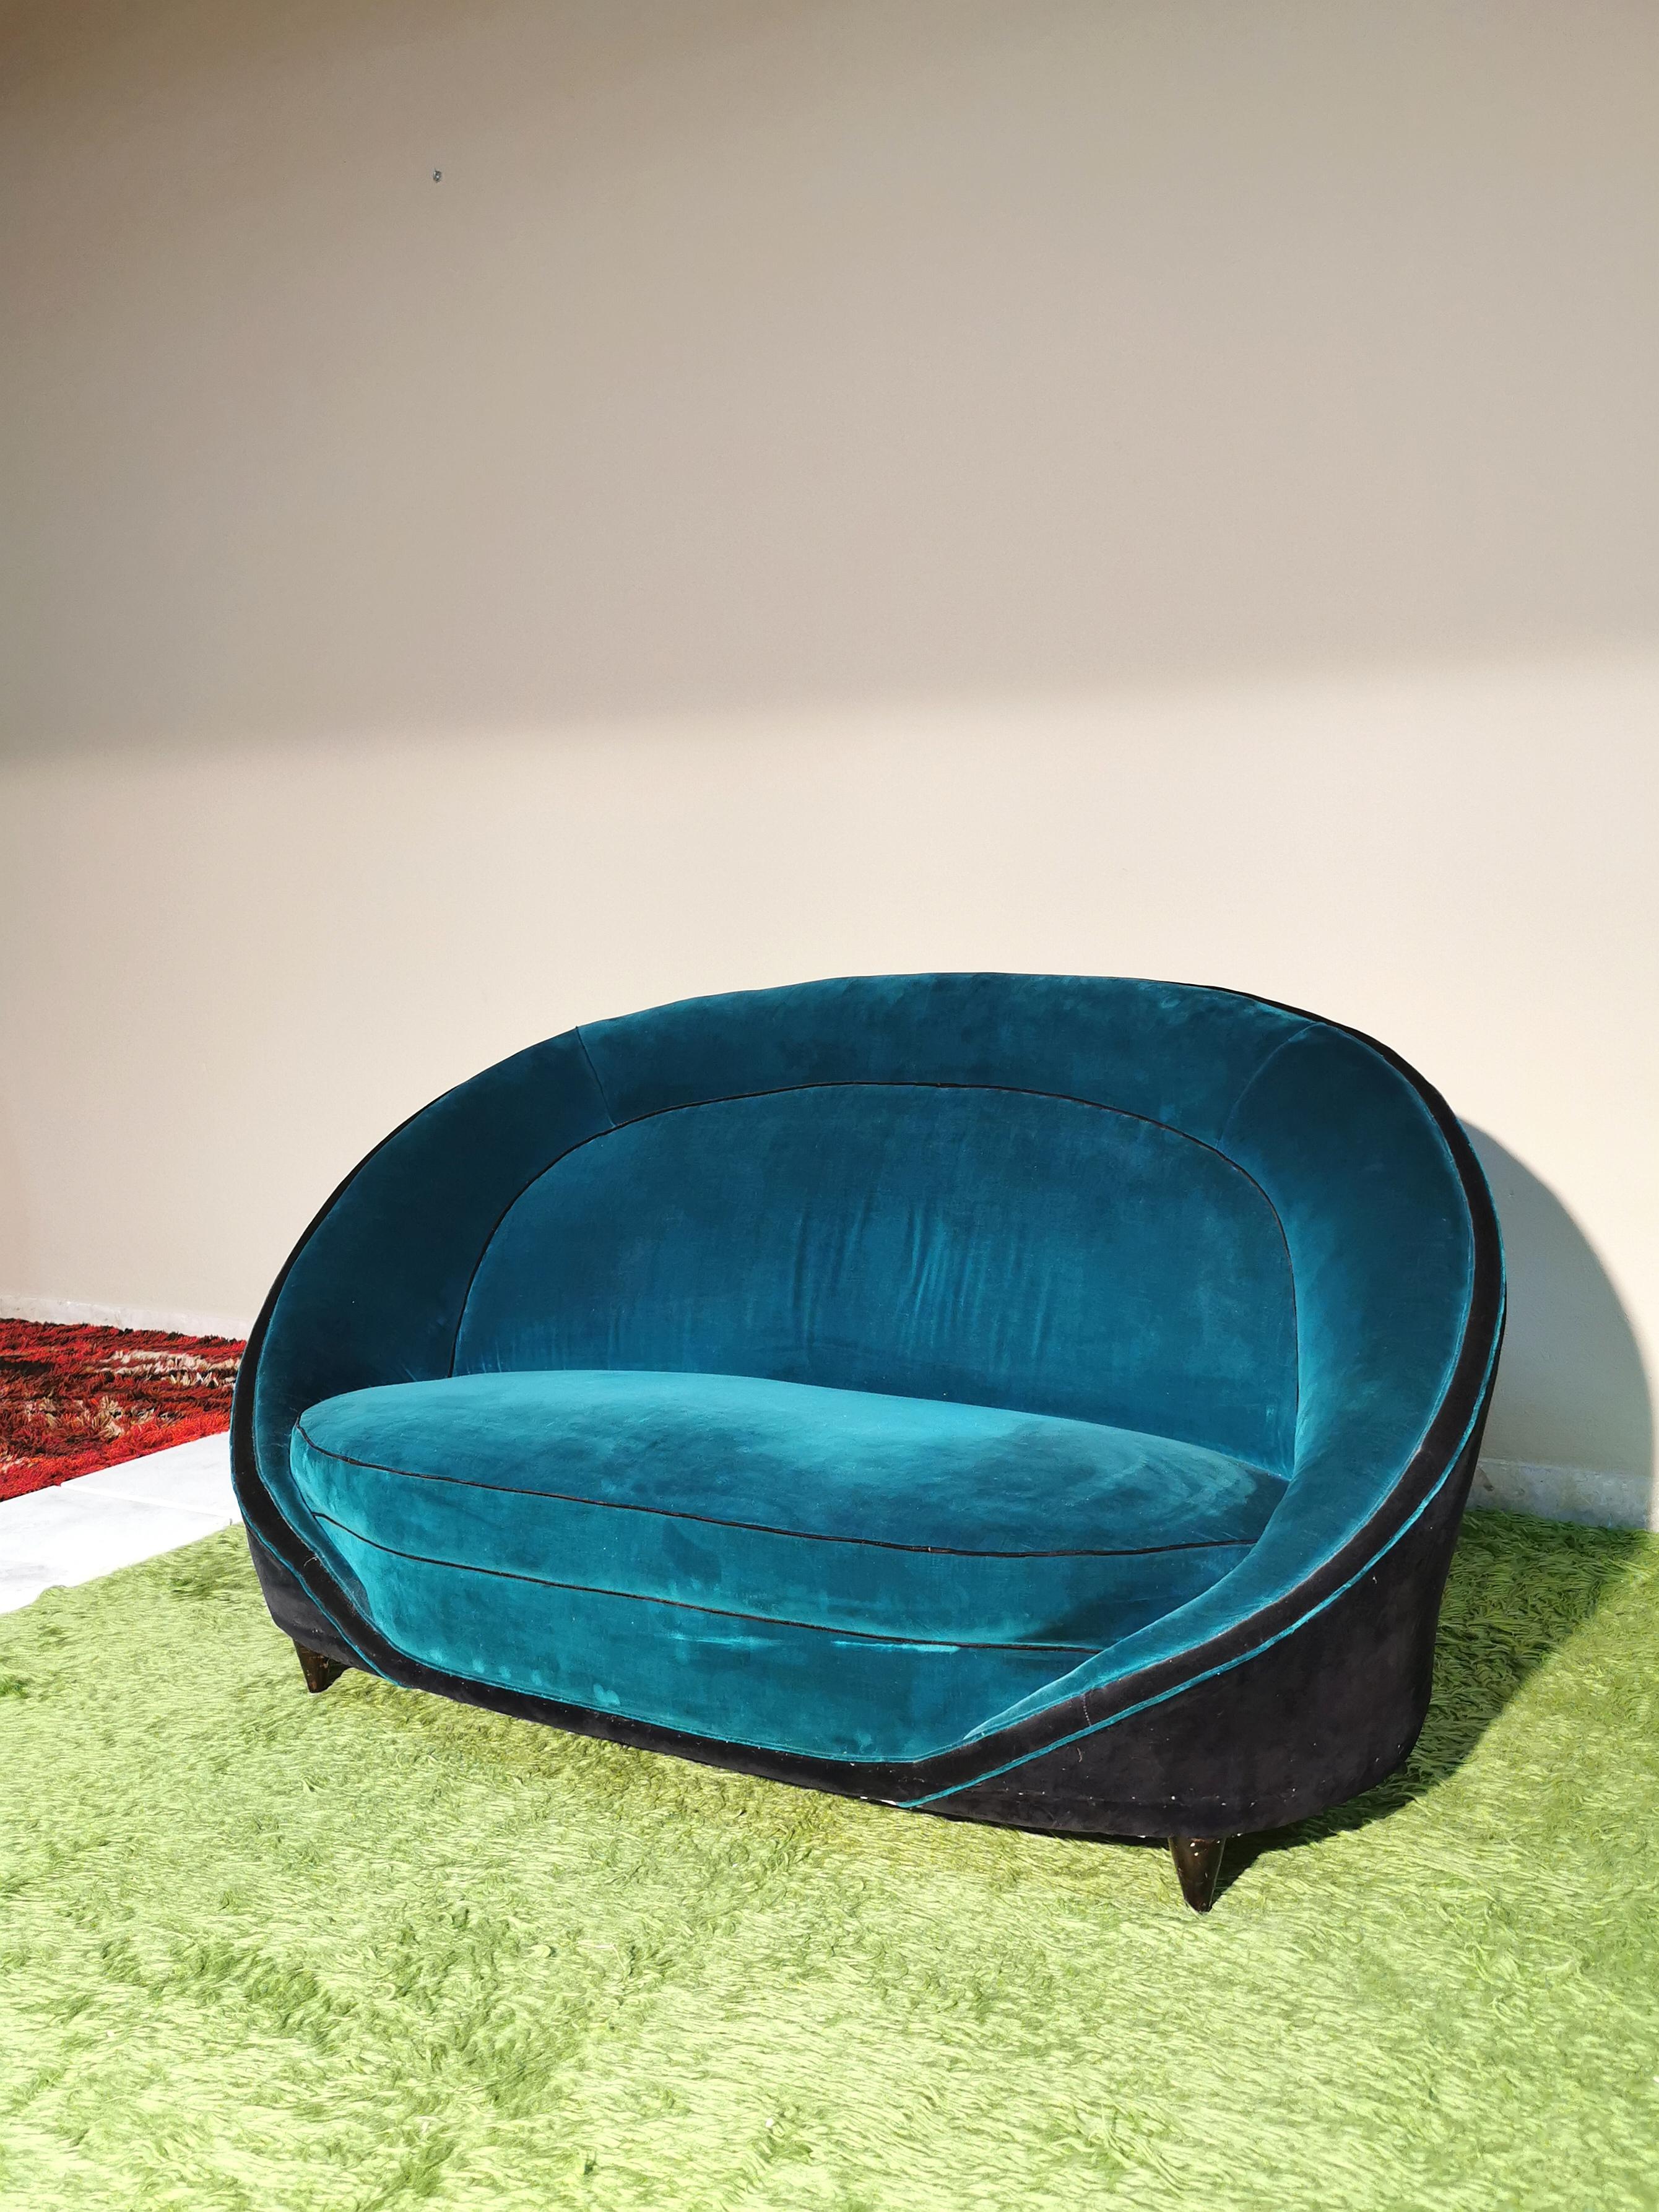 Exceptional, elegant, in the syle of Gio Ponti sofa in emerald green smooth velvet with two-tone effect. Feet of conical shape in wood, all original of the period. Italy.